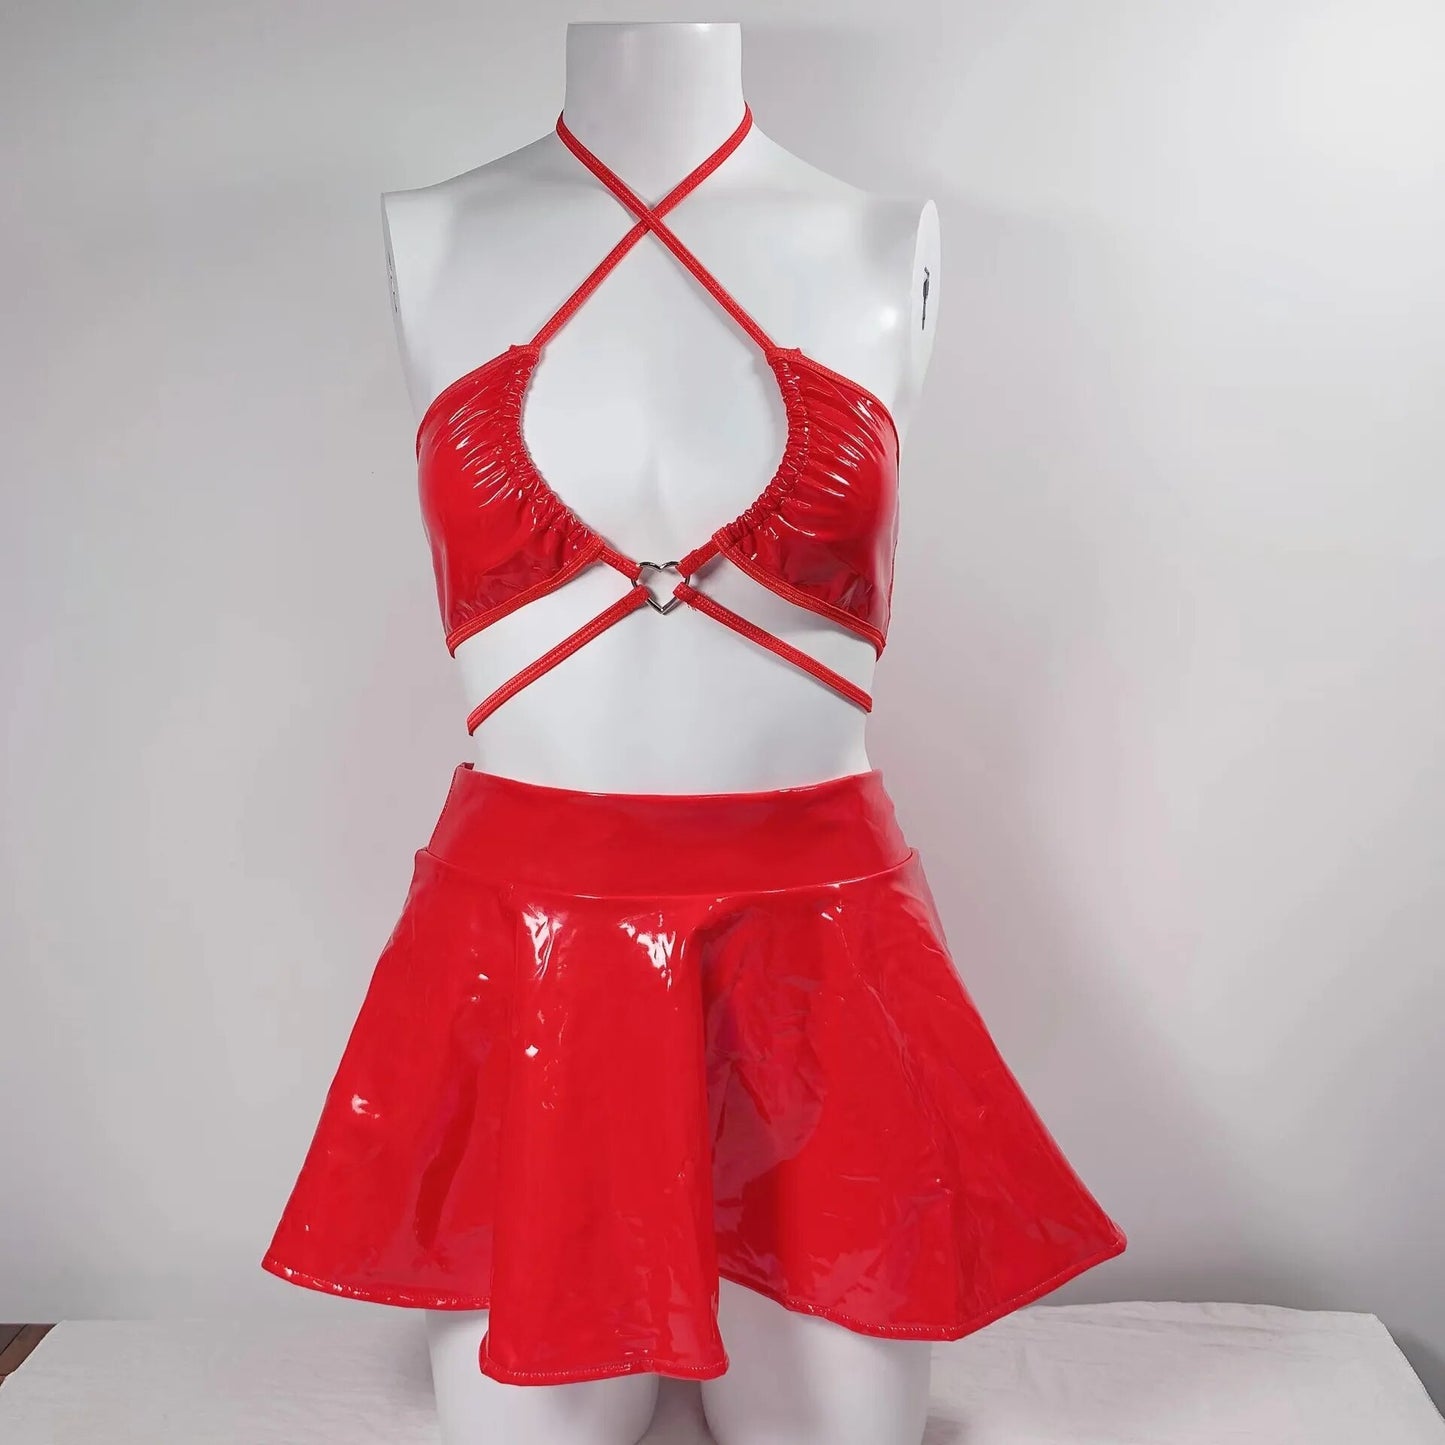 Pvc Lingerie PU Leather Setup Ladies Skirt Underwear Red Set Woman 2 Pieces Cross Bra Sexy Outfits